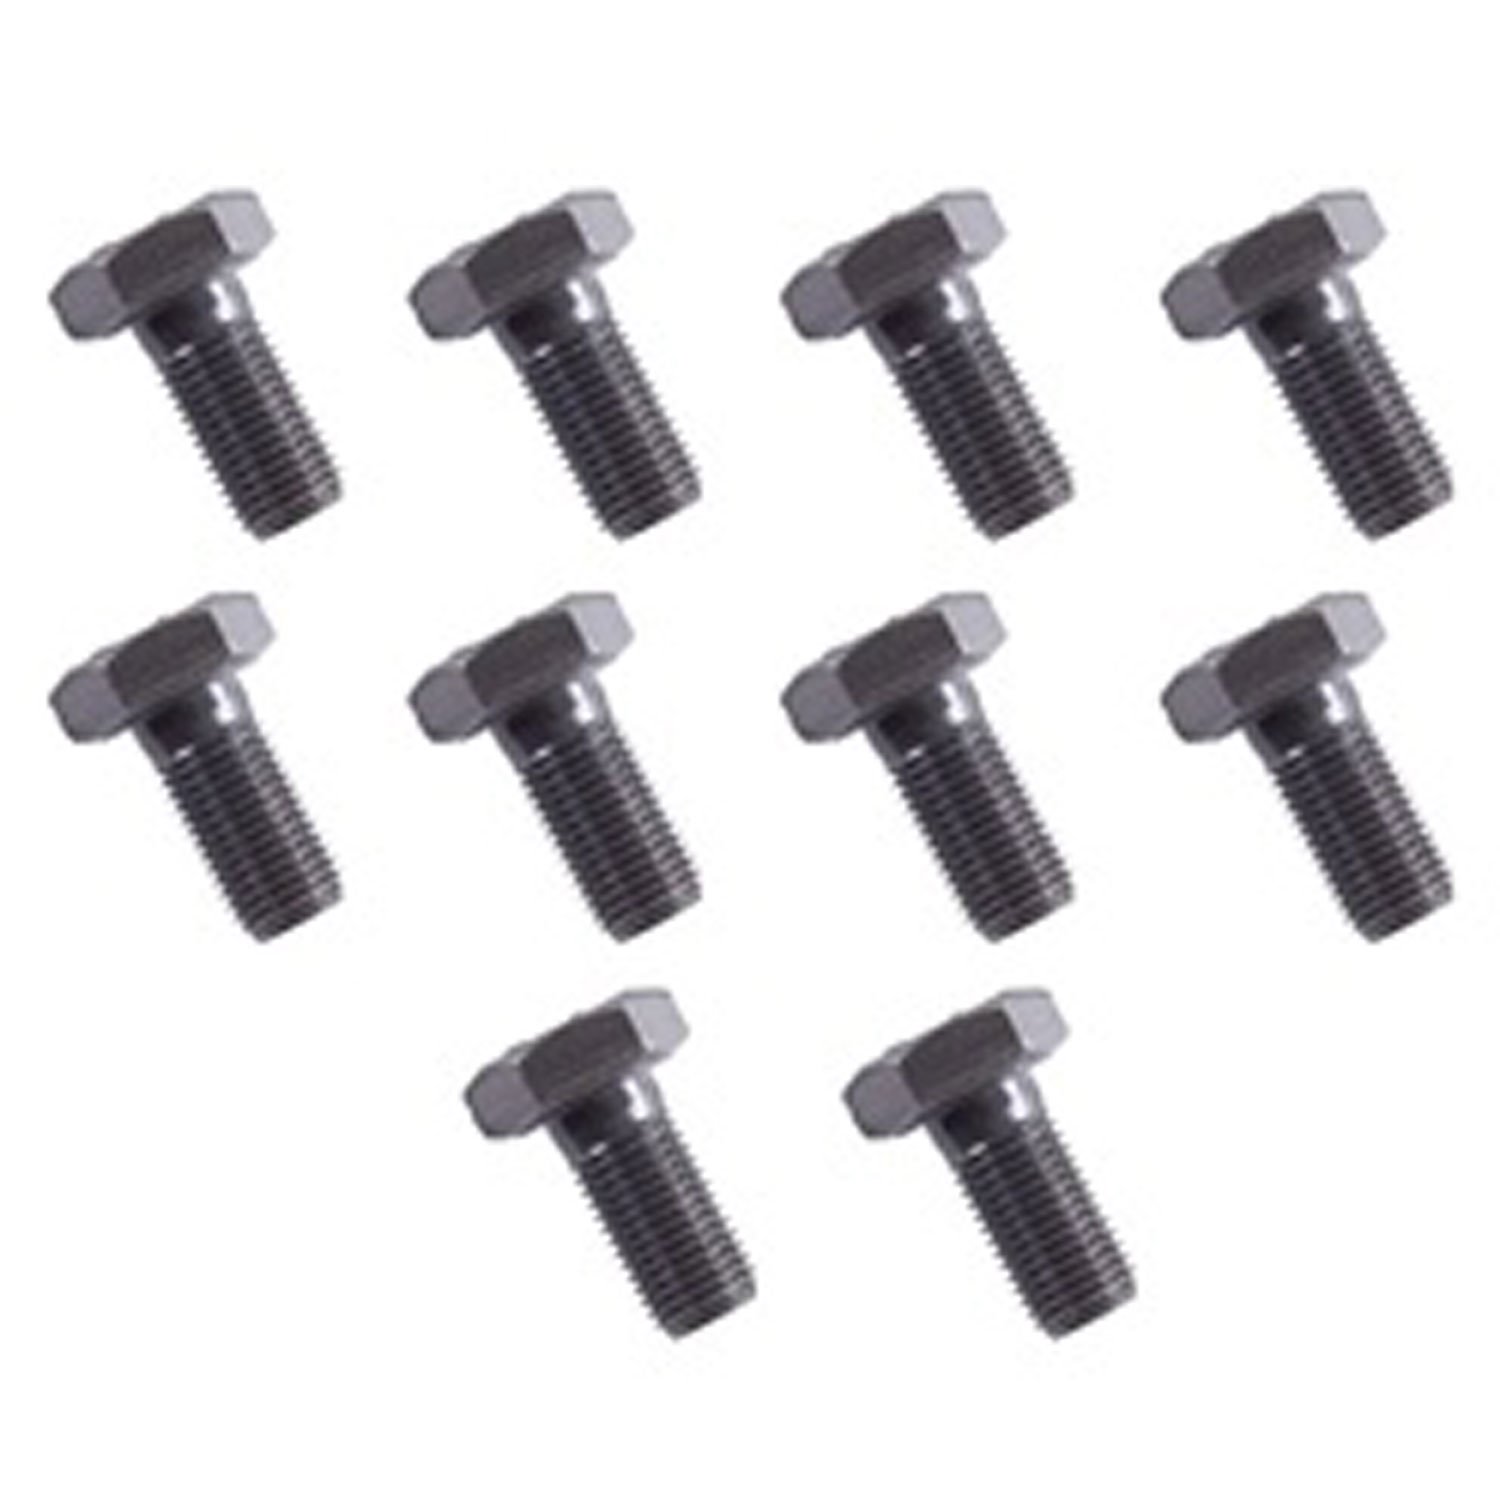 This set of 10 ring gear bolts from